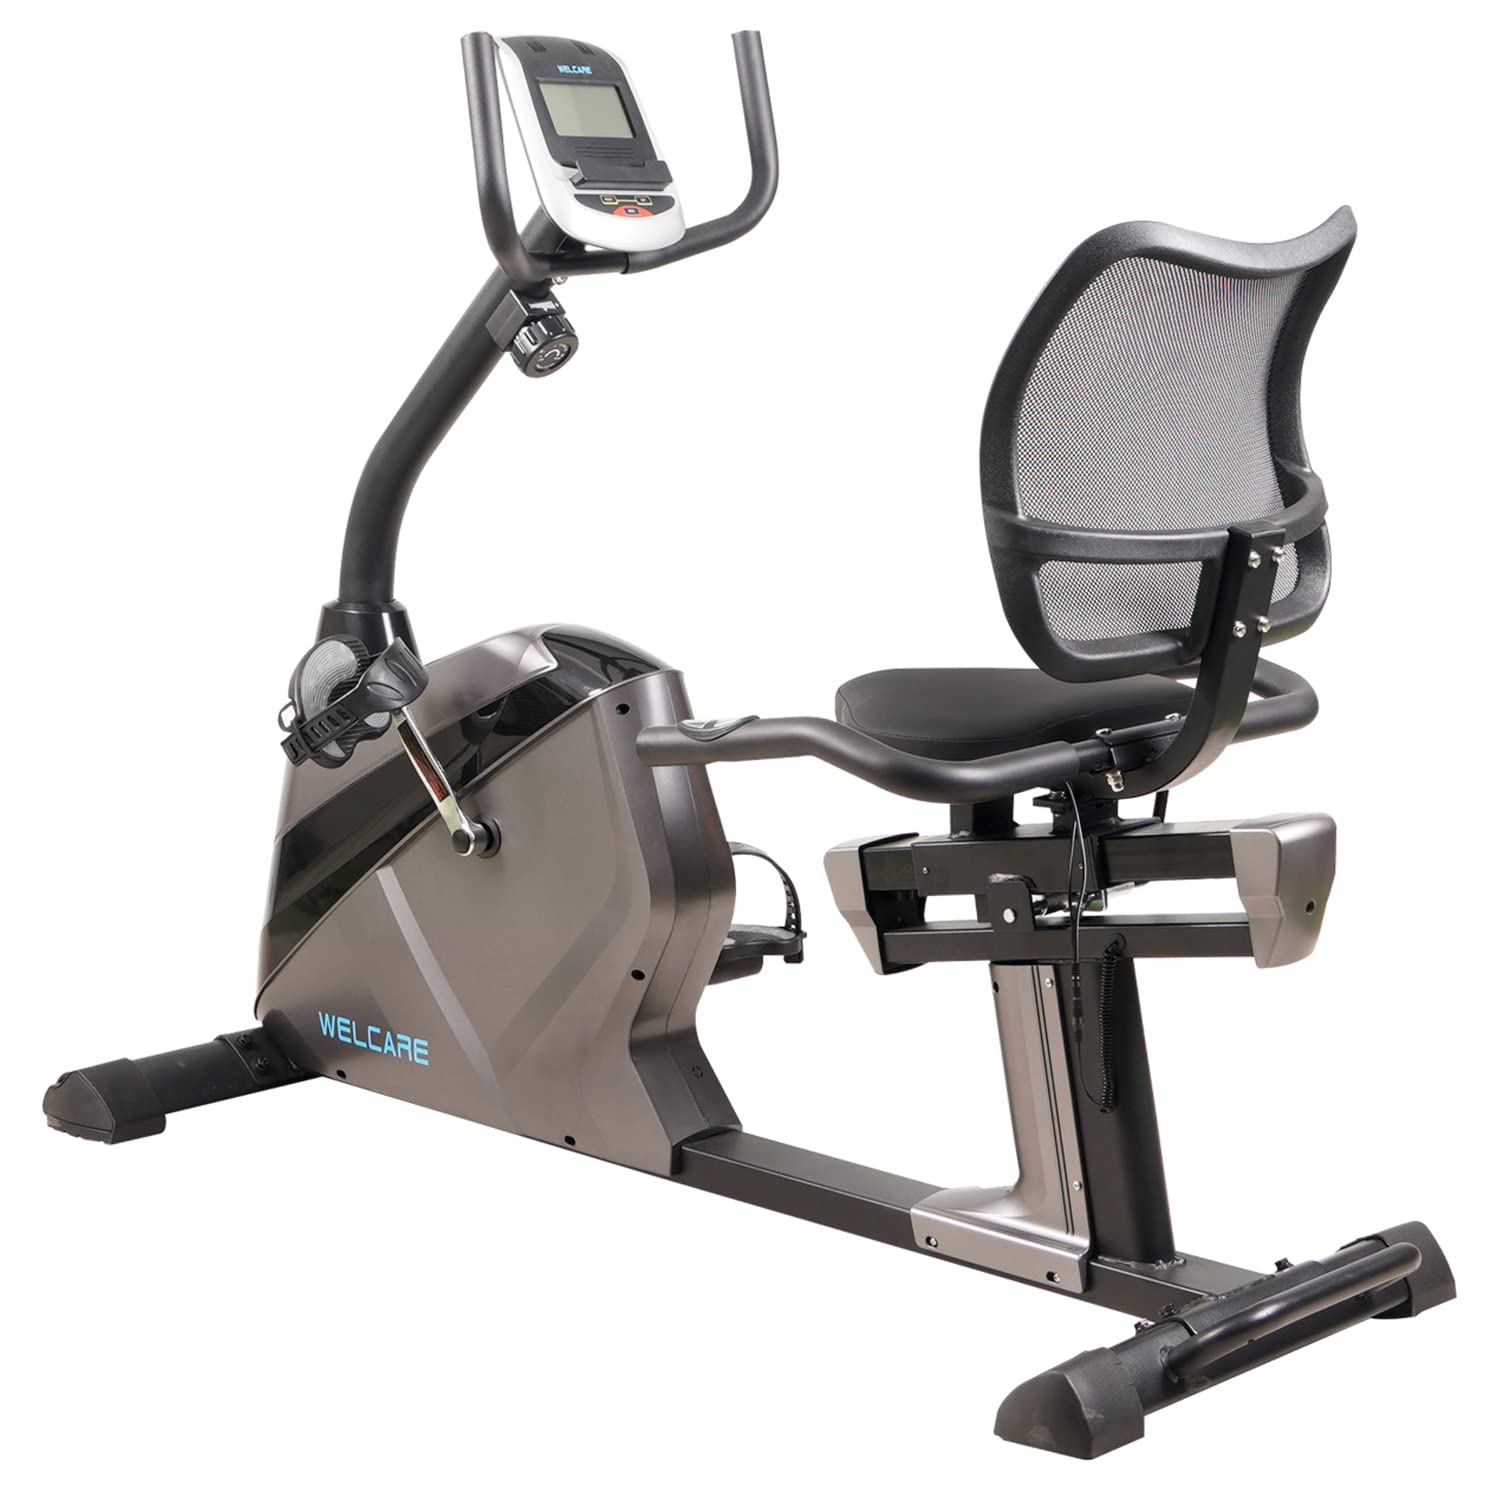 Welcare WC1599 Recumbent Exercise Bike For Weight Loss